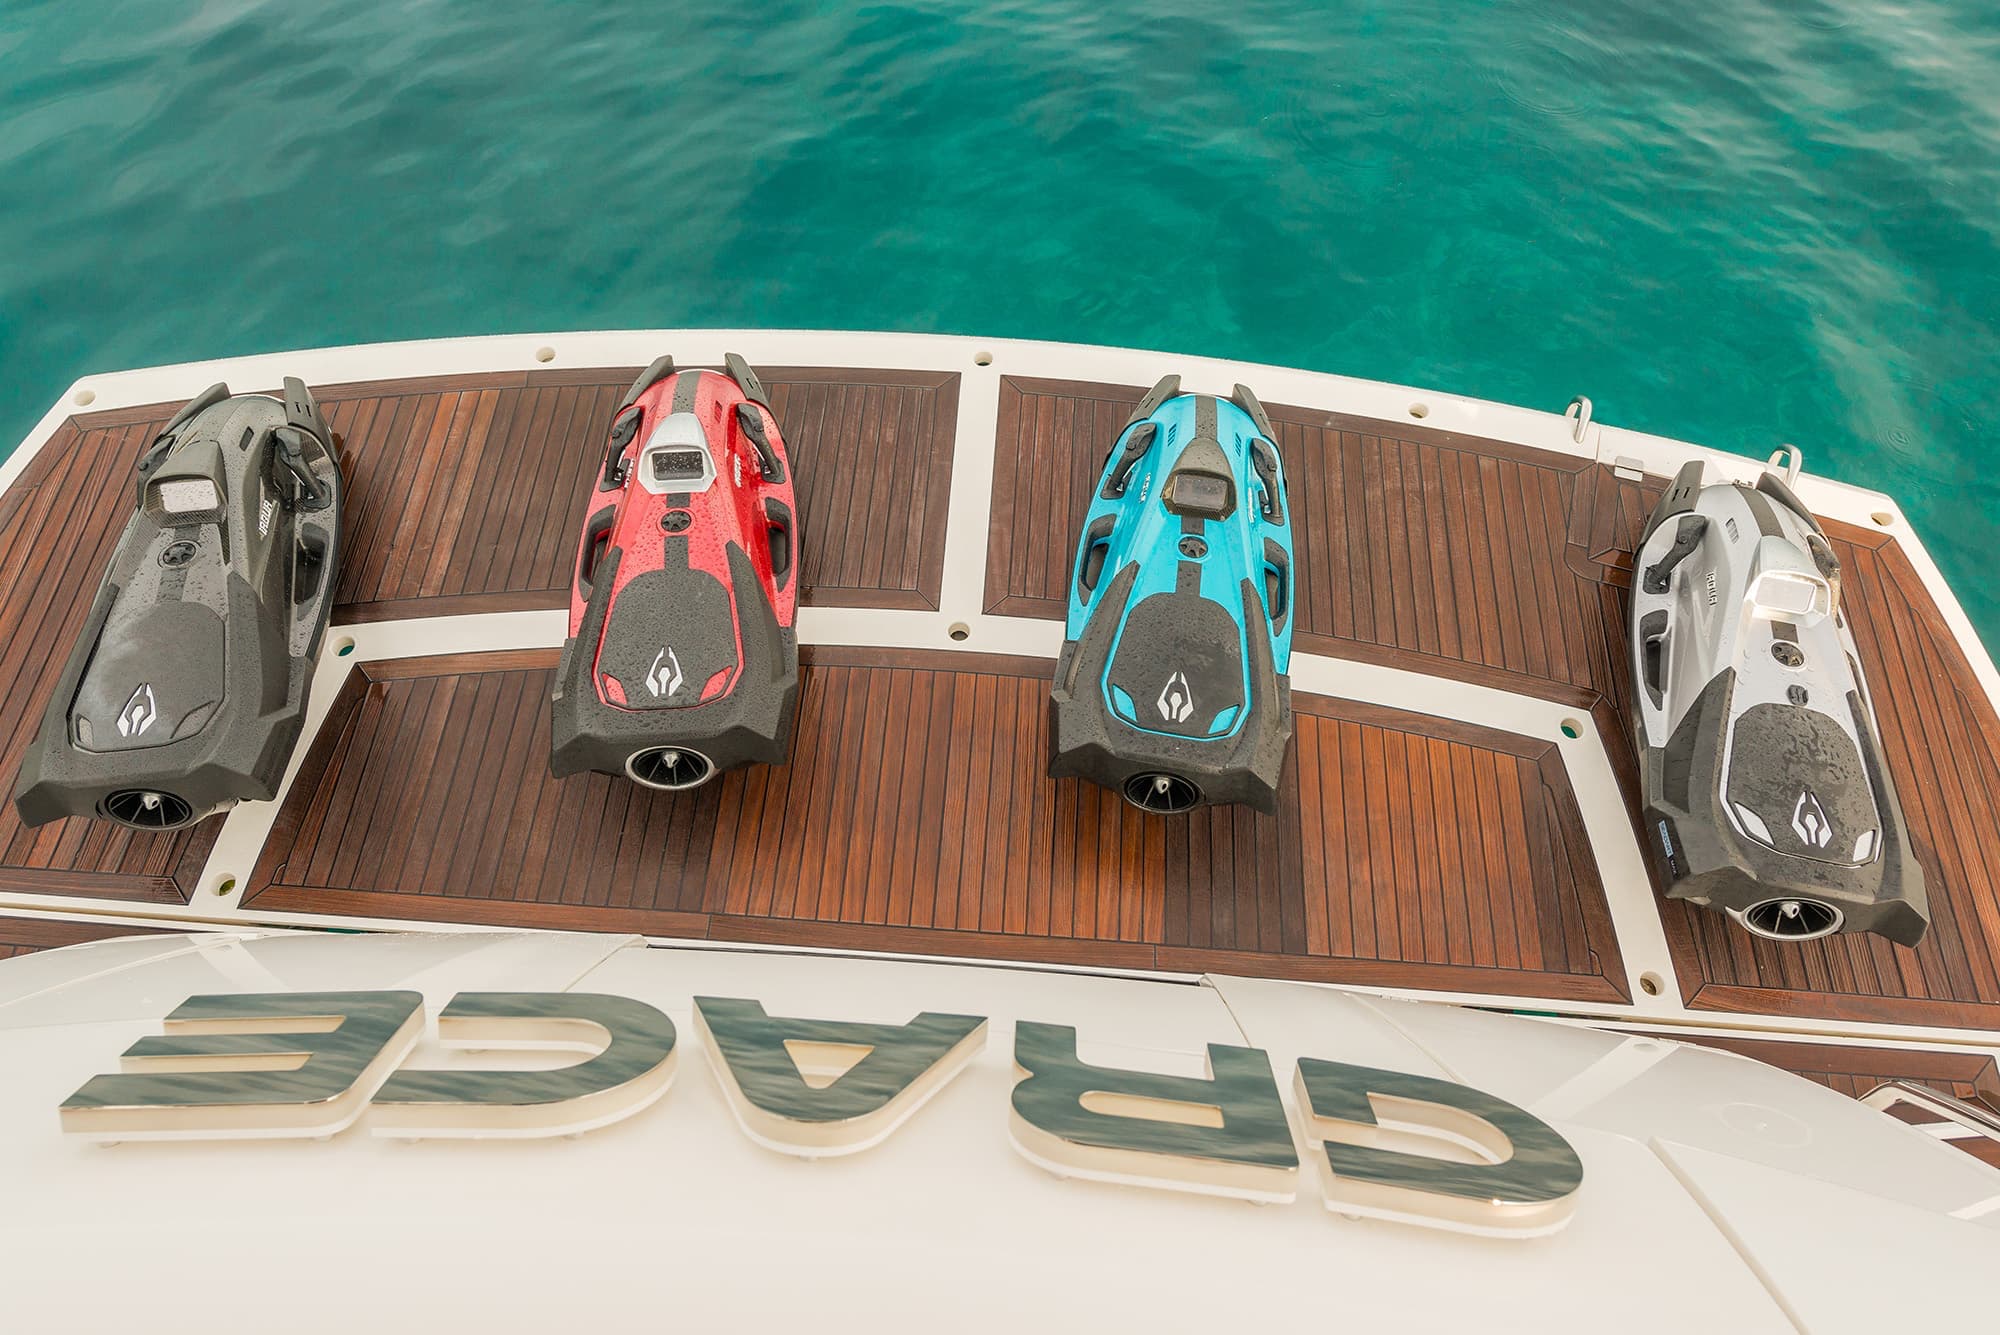 Four scuba jets in black, red, blue, and grey are lined up on a wooden deck.